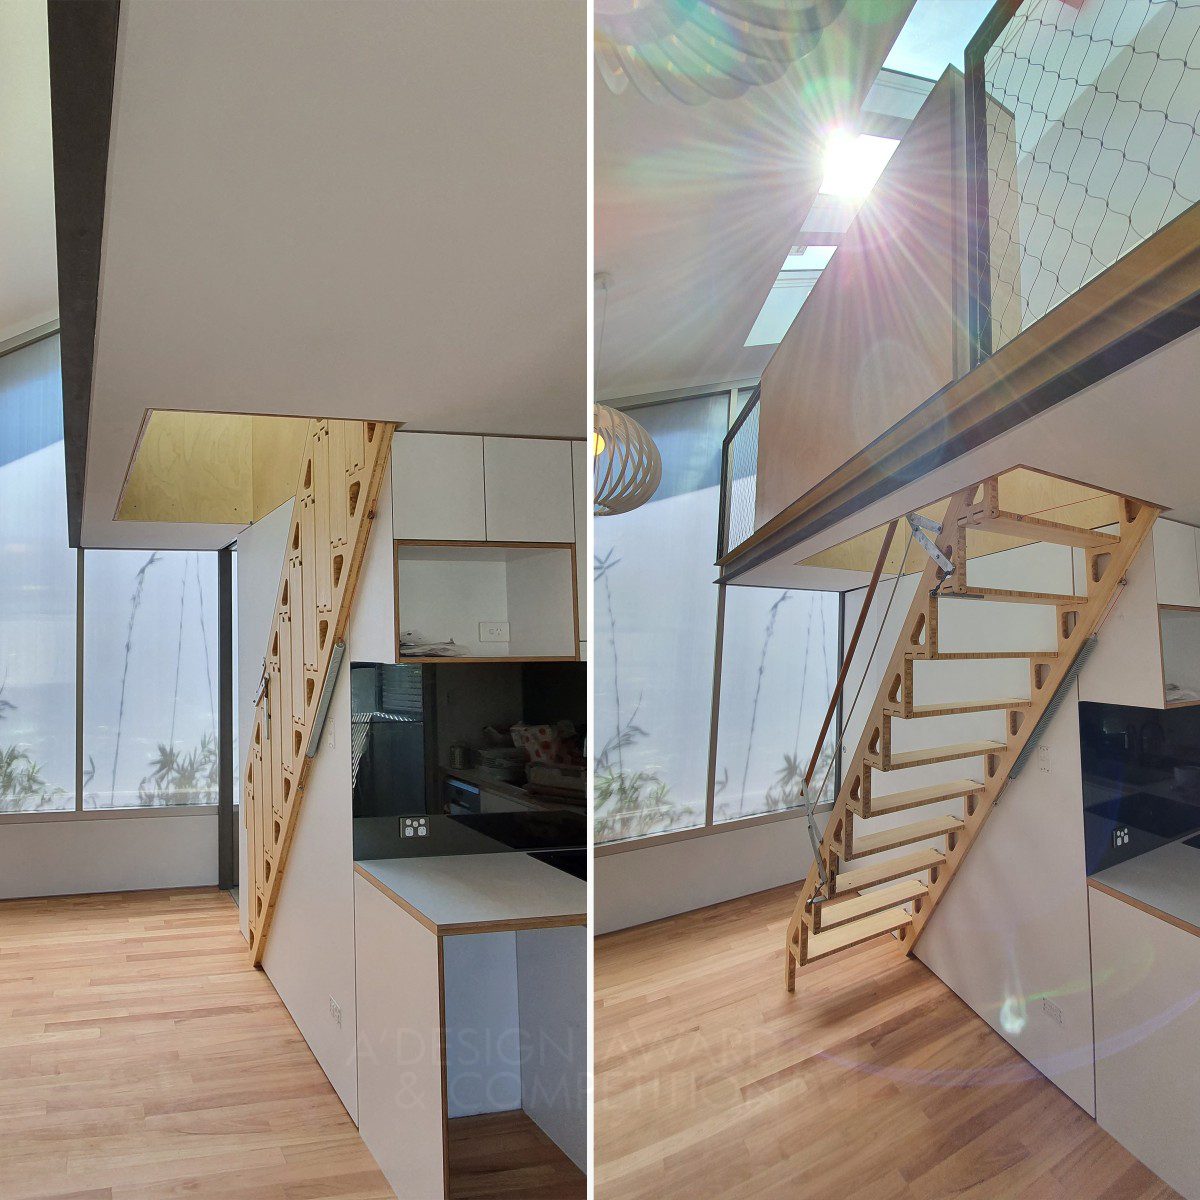 Zev Bianchi wins Silver at the prestigious A' Building Materials and Construction Components Design Award with Bcompact Hybrid Compact Side Folding Stair.